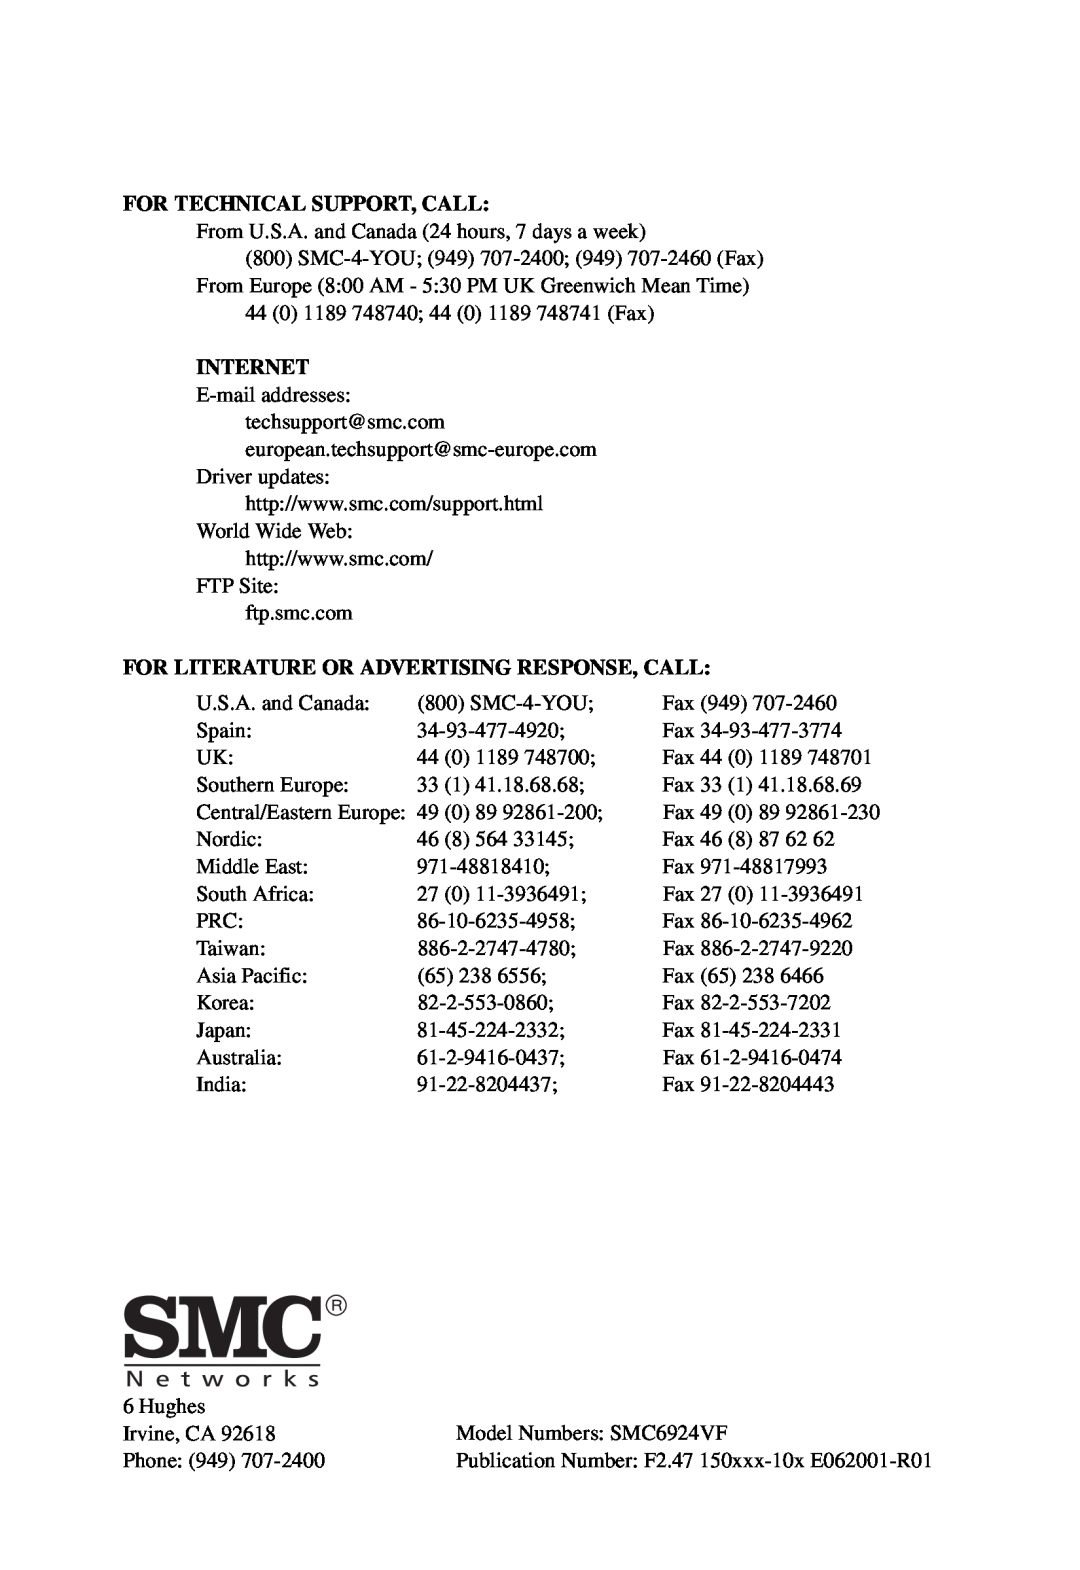 SMC Networks SMC6924VF manual For Technical Support, Call, Internet, For Literature Or Advertising Response, Call 